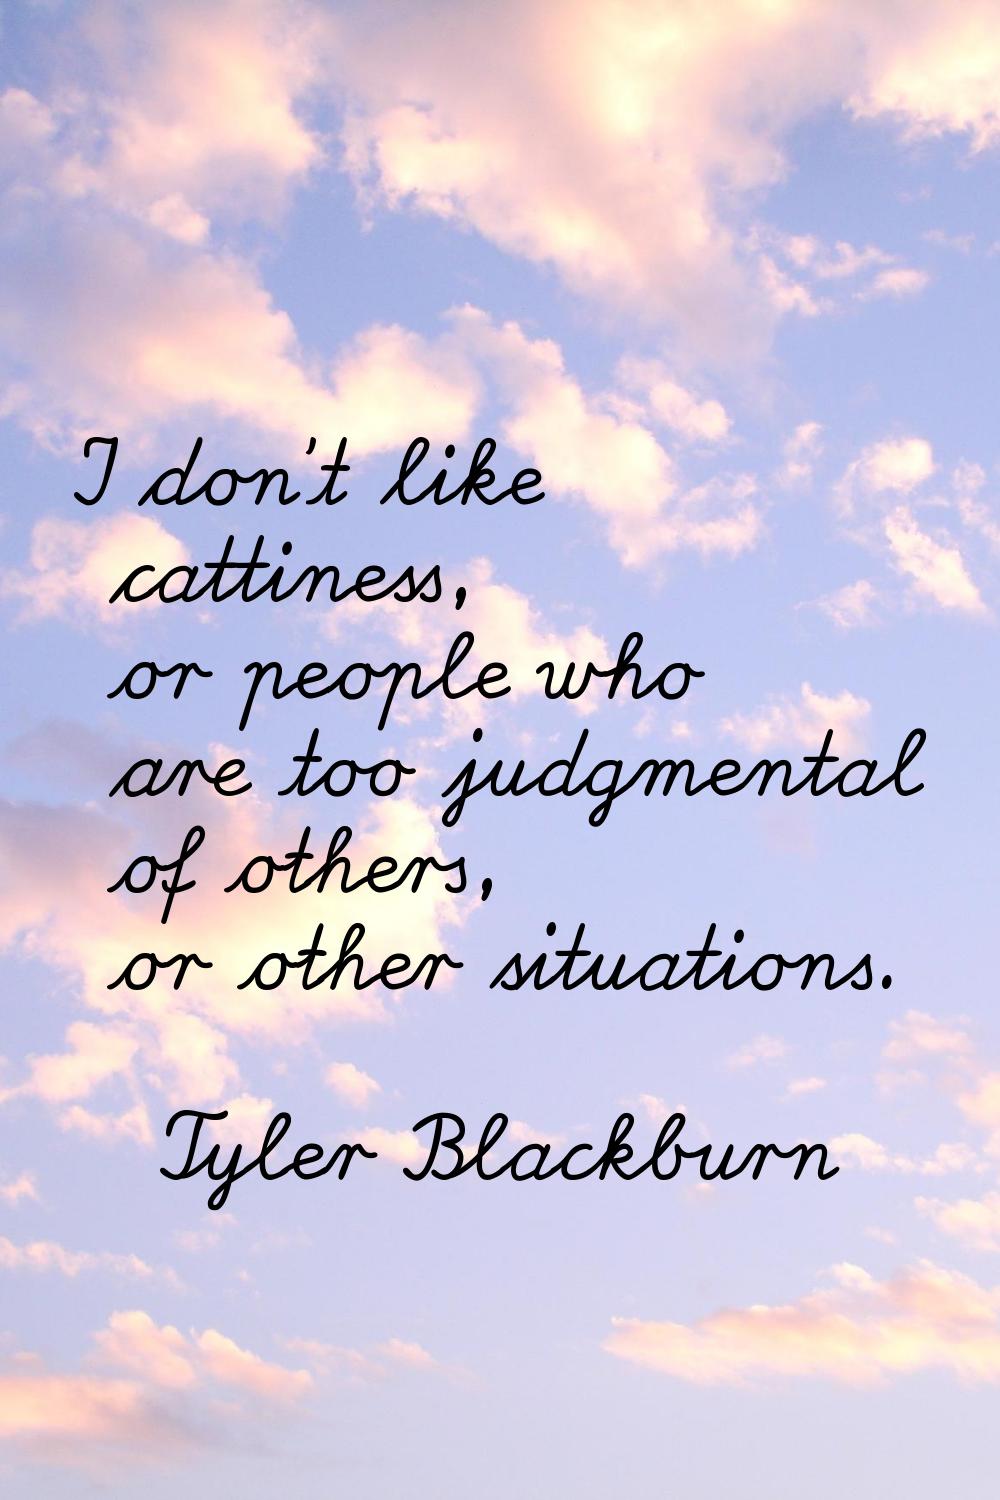 I don't like cattiness, or people who are too judgmental of others, or other situations.